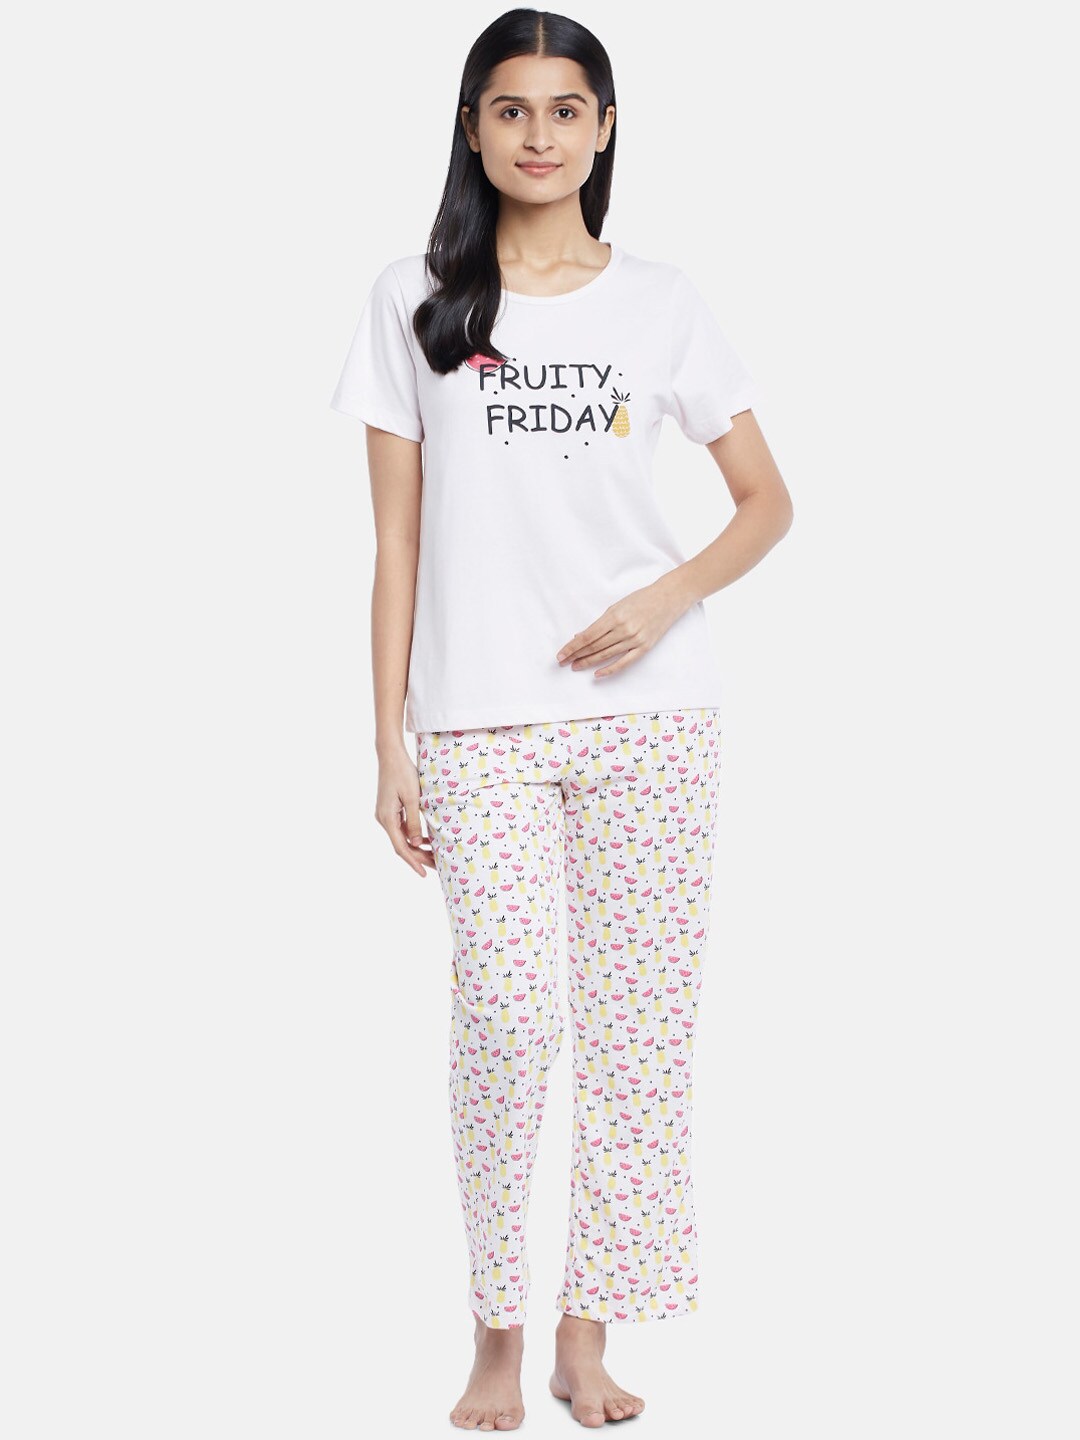 Dreamz by Pantaloons Women White & Pink Printed Night suit Price in India